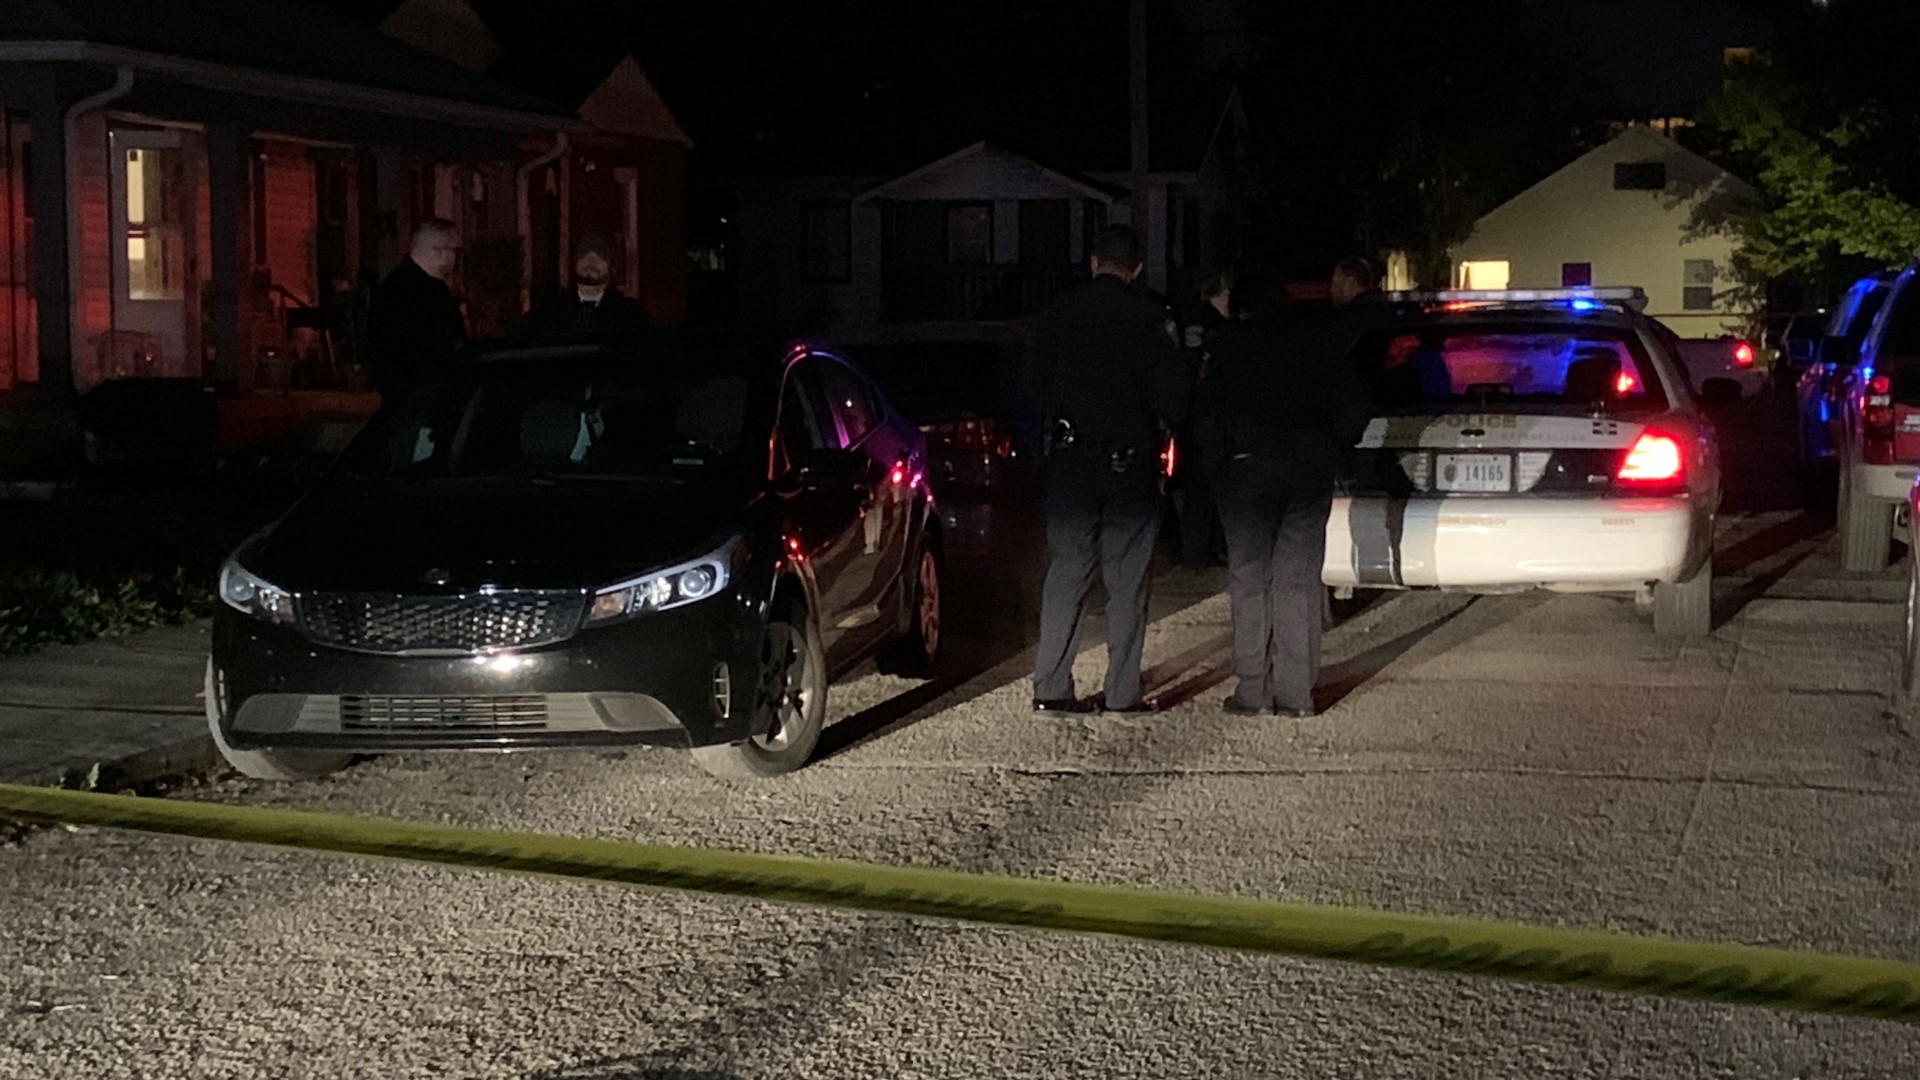 IMPD said two dogs charged at an officer, so the officer fired a shot at one of the dogs, striking it, as well as striking a person in the hand.